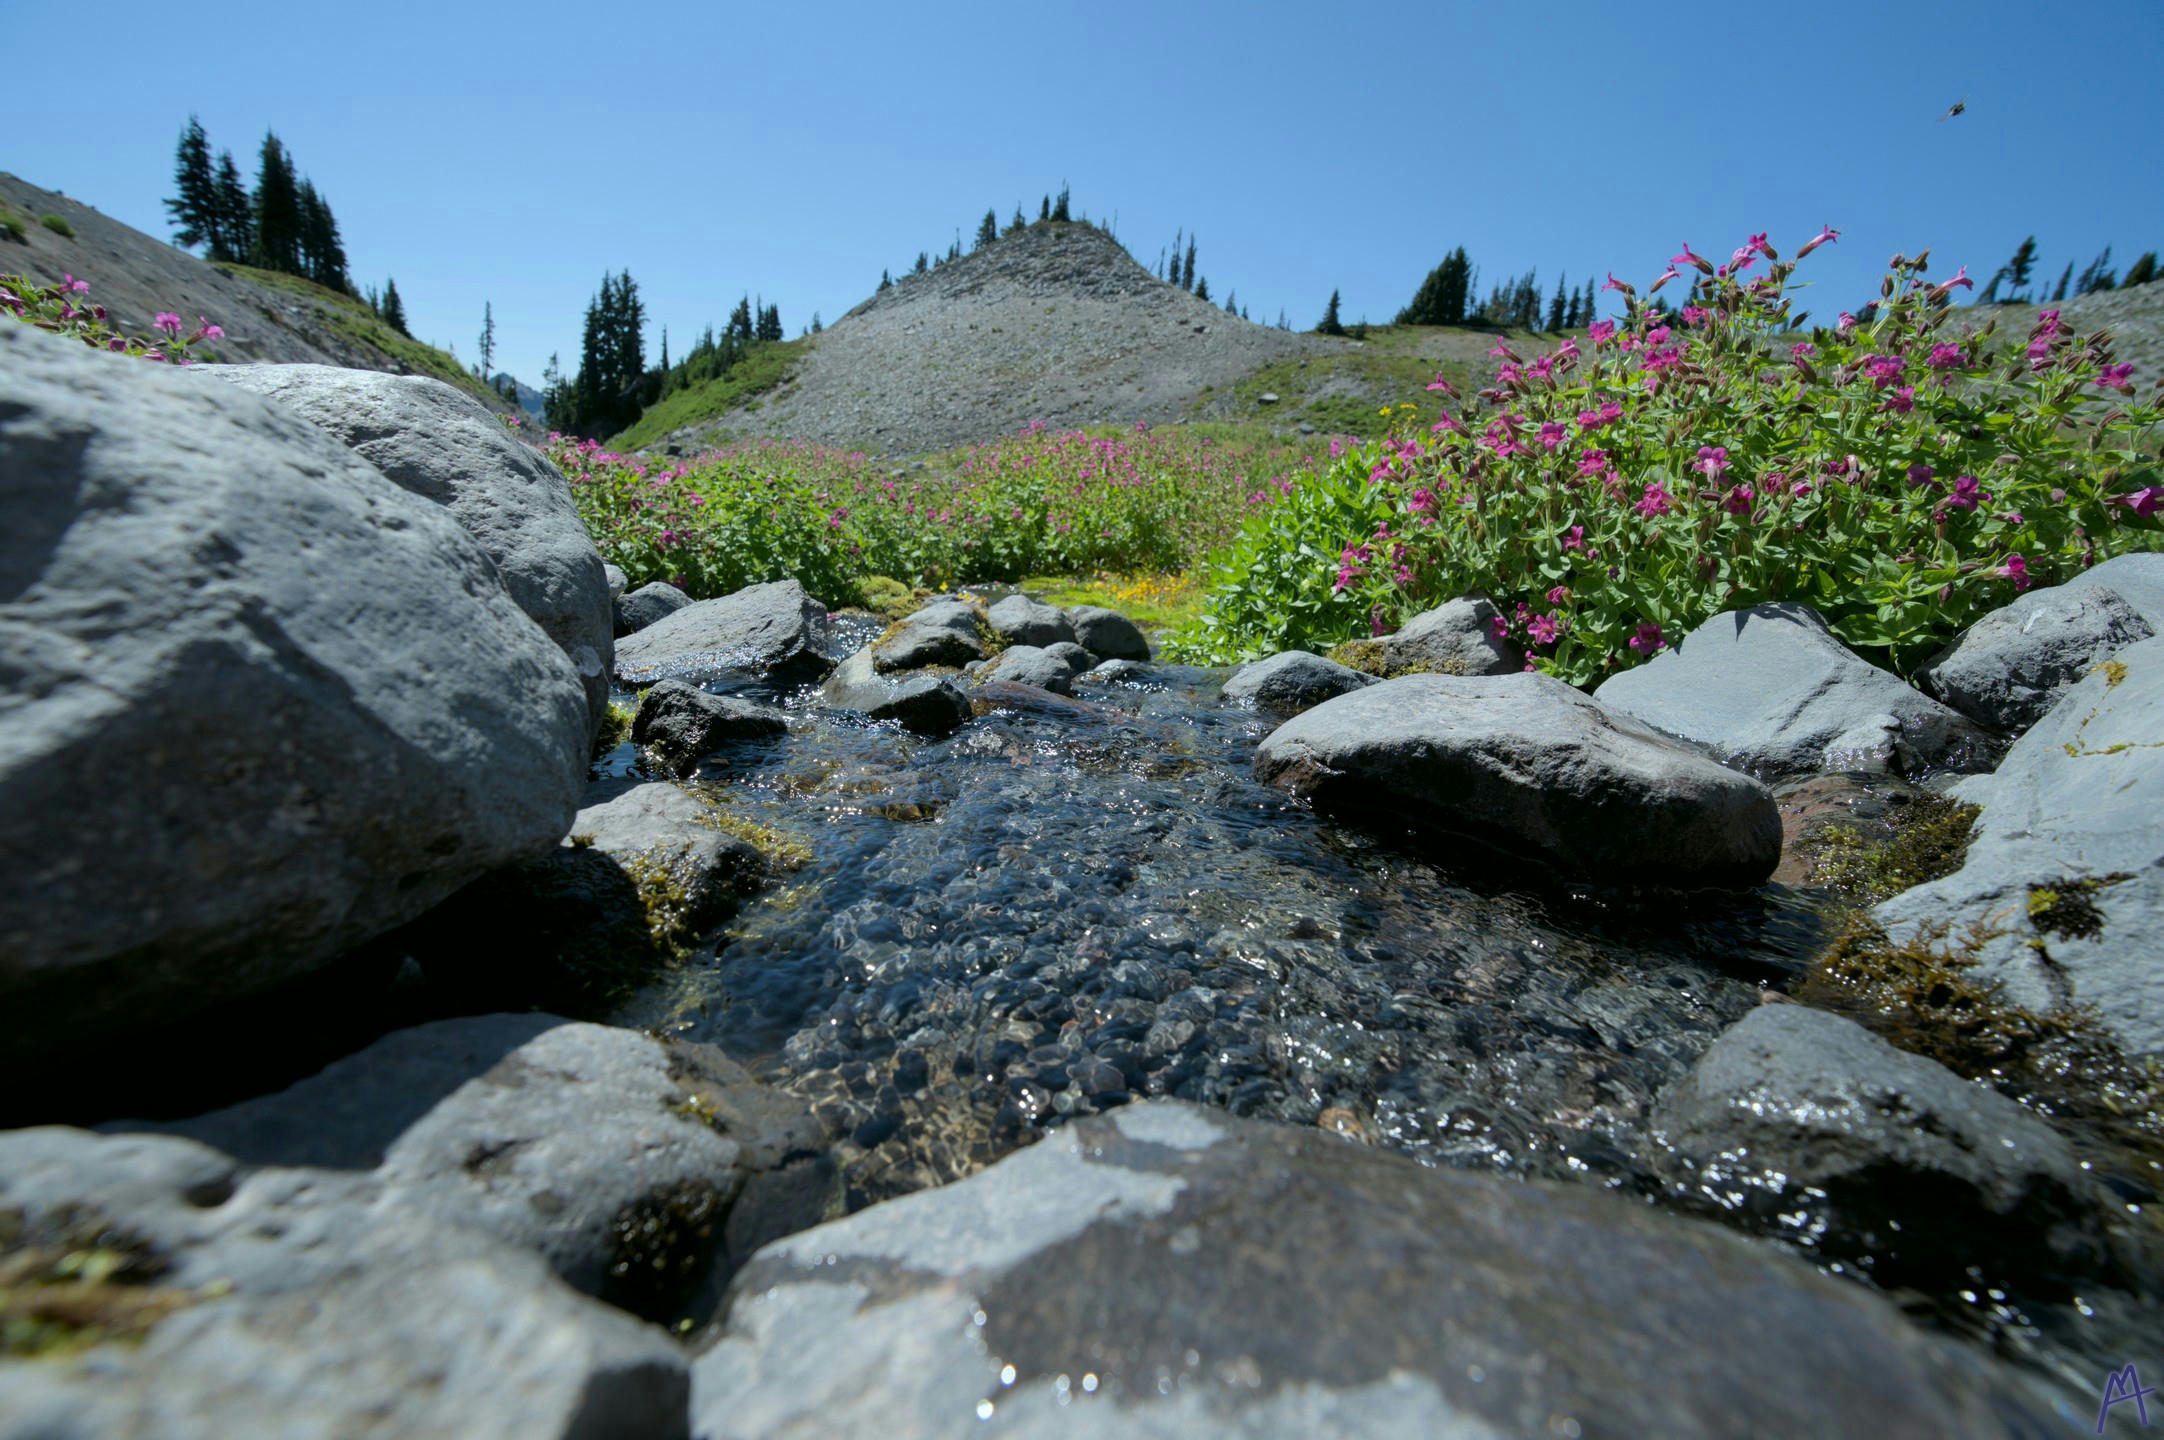 Small pond surrounded by rocks an flowers at Rainier